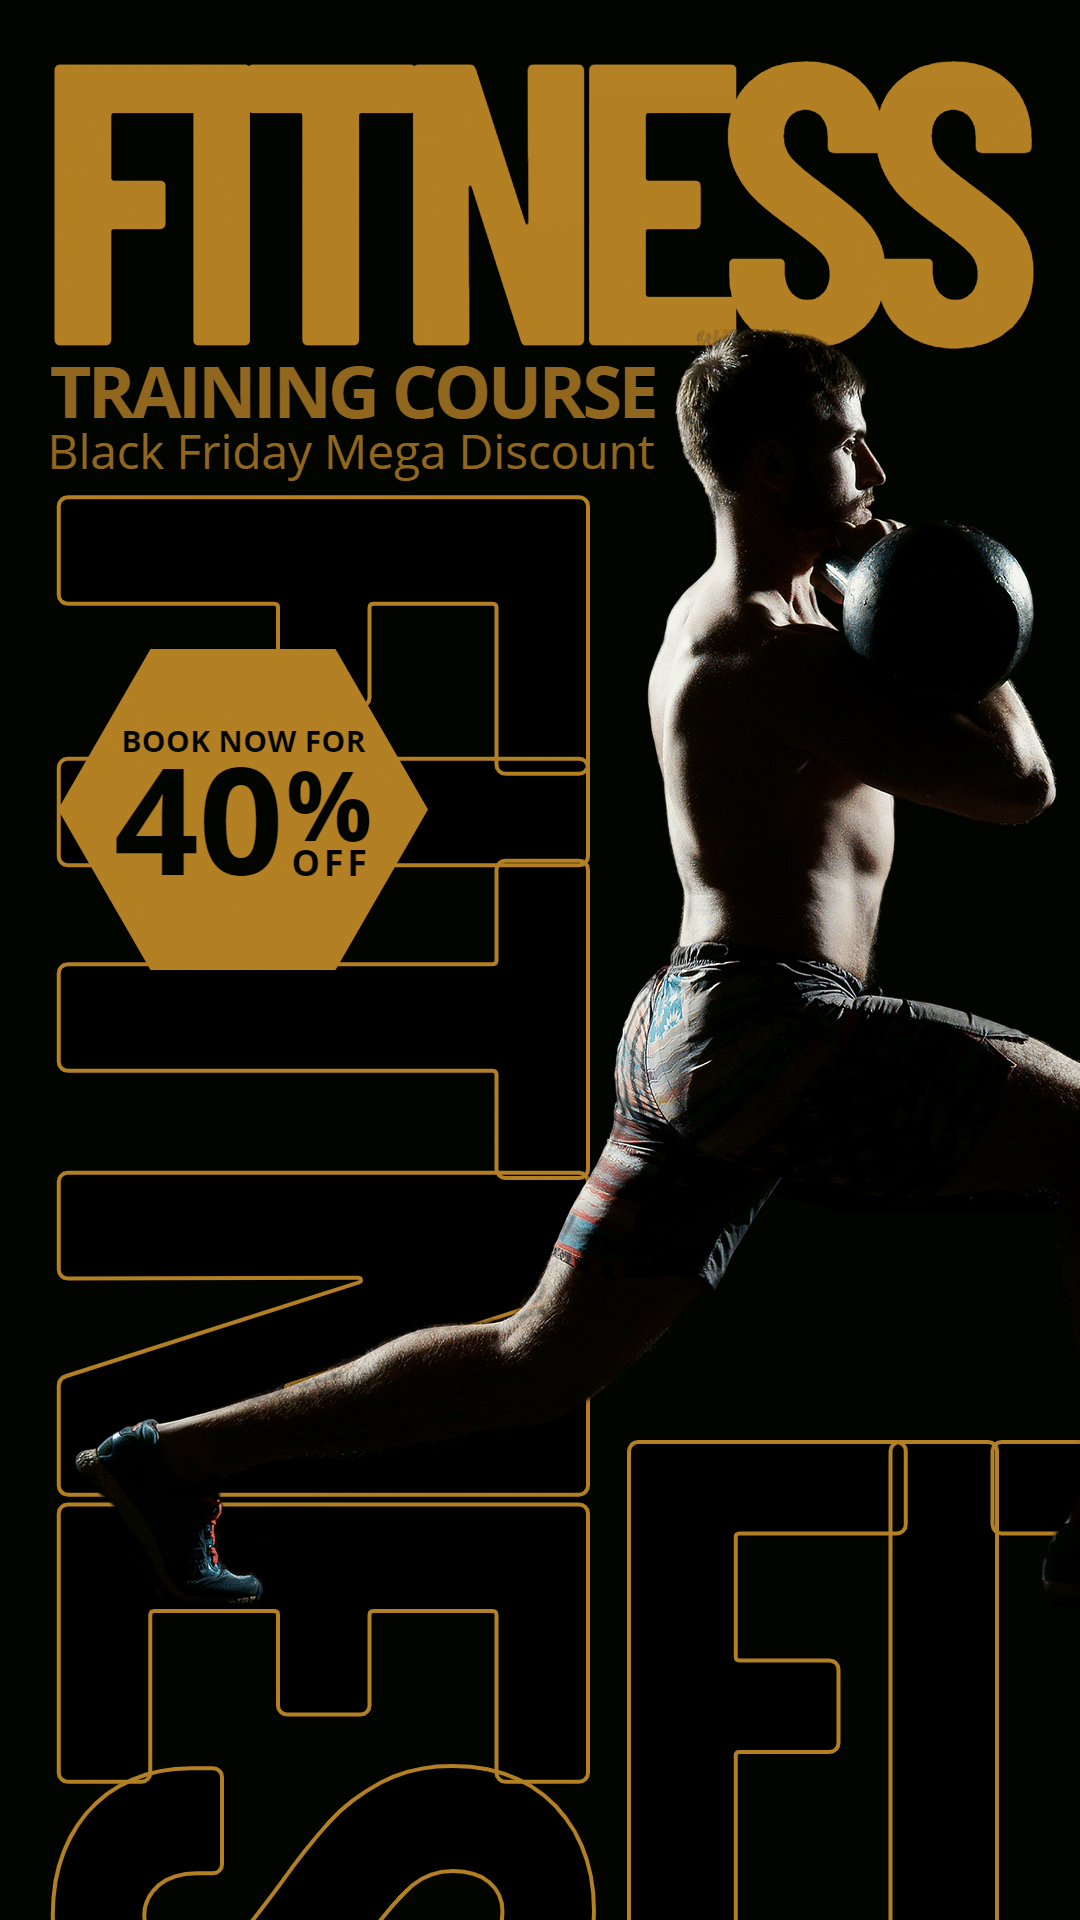 Black Friday Training Course Discount Ecommerce Story预览效果